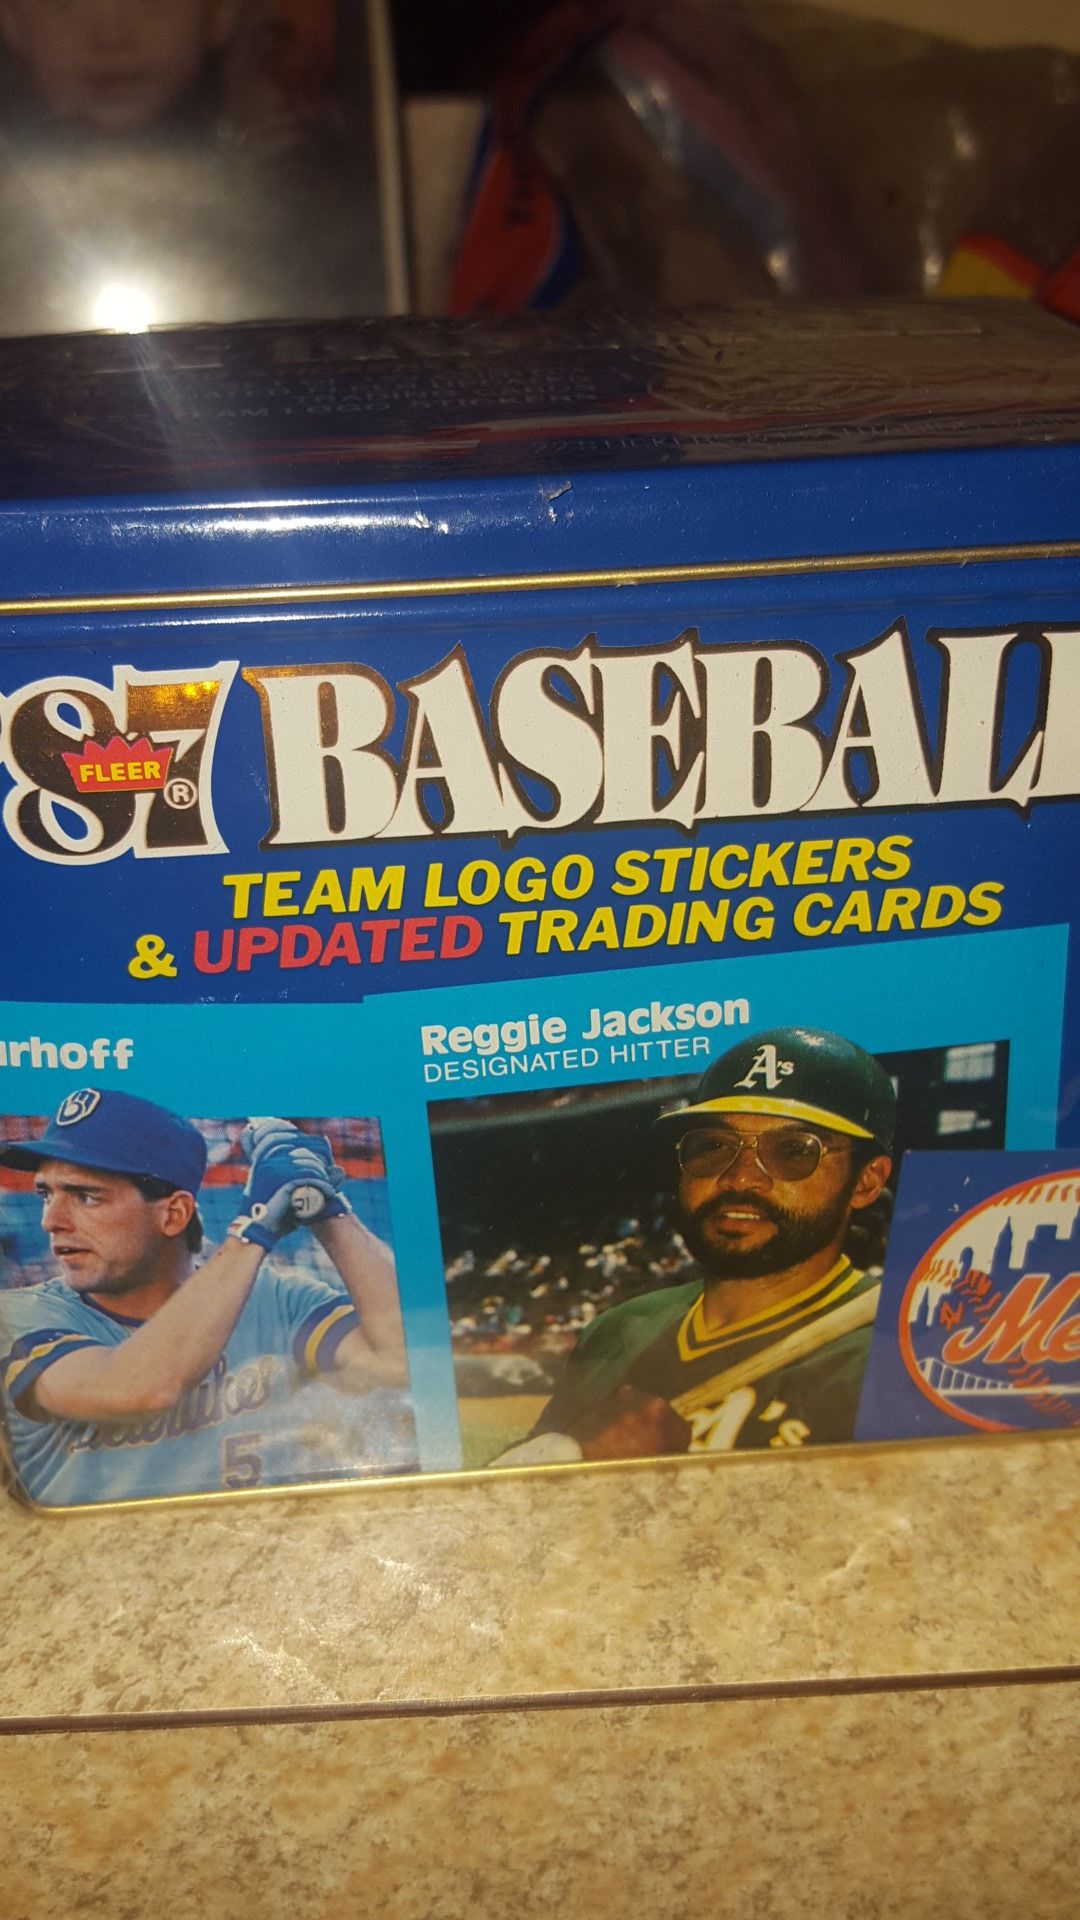 1987 Fleer Baseball Team Logo Stickers & Updated Trading Cards - Factory sealed